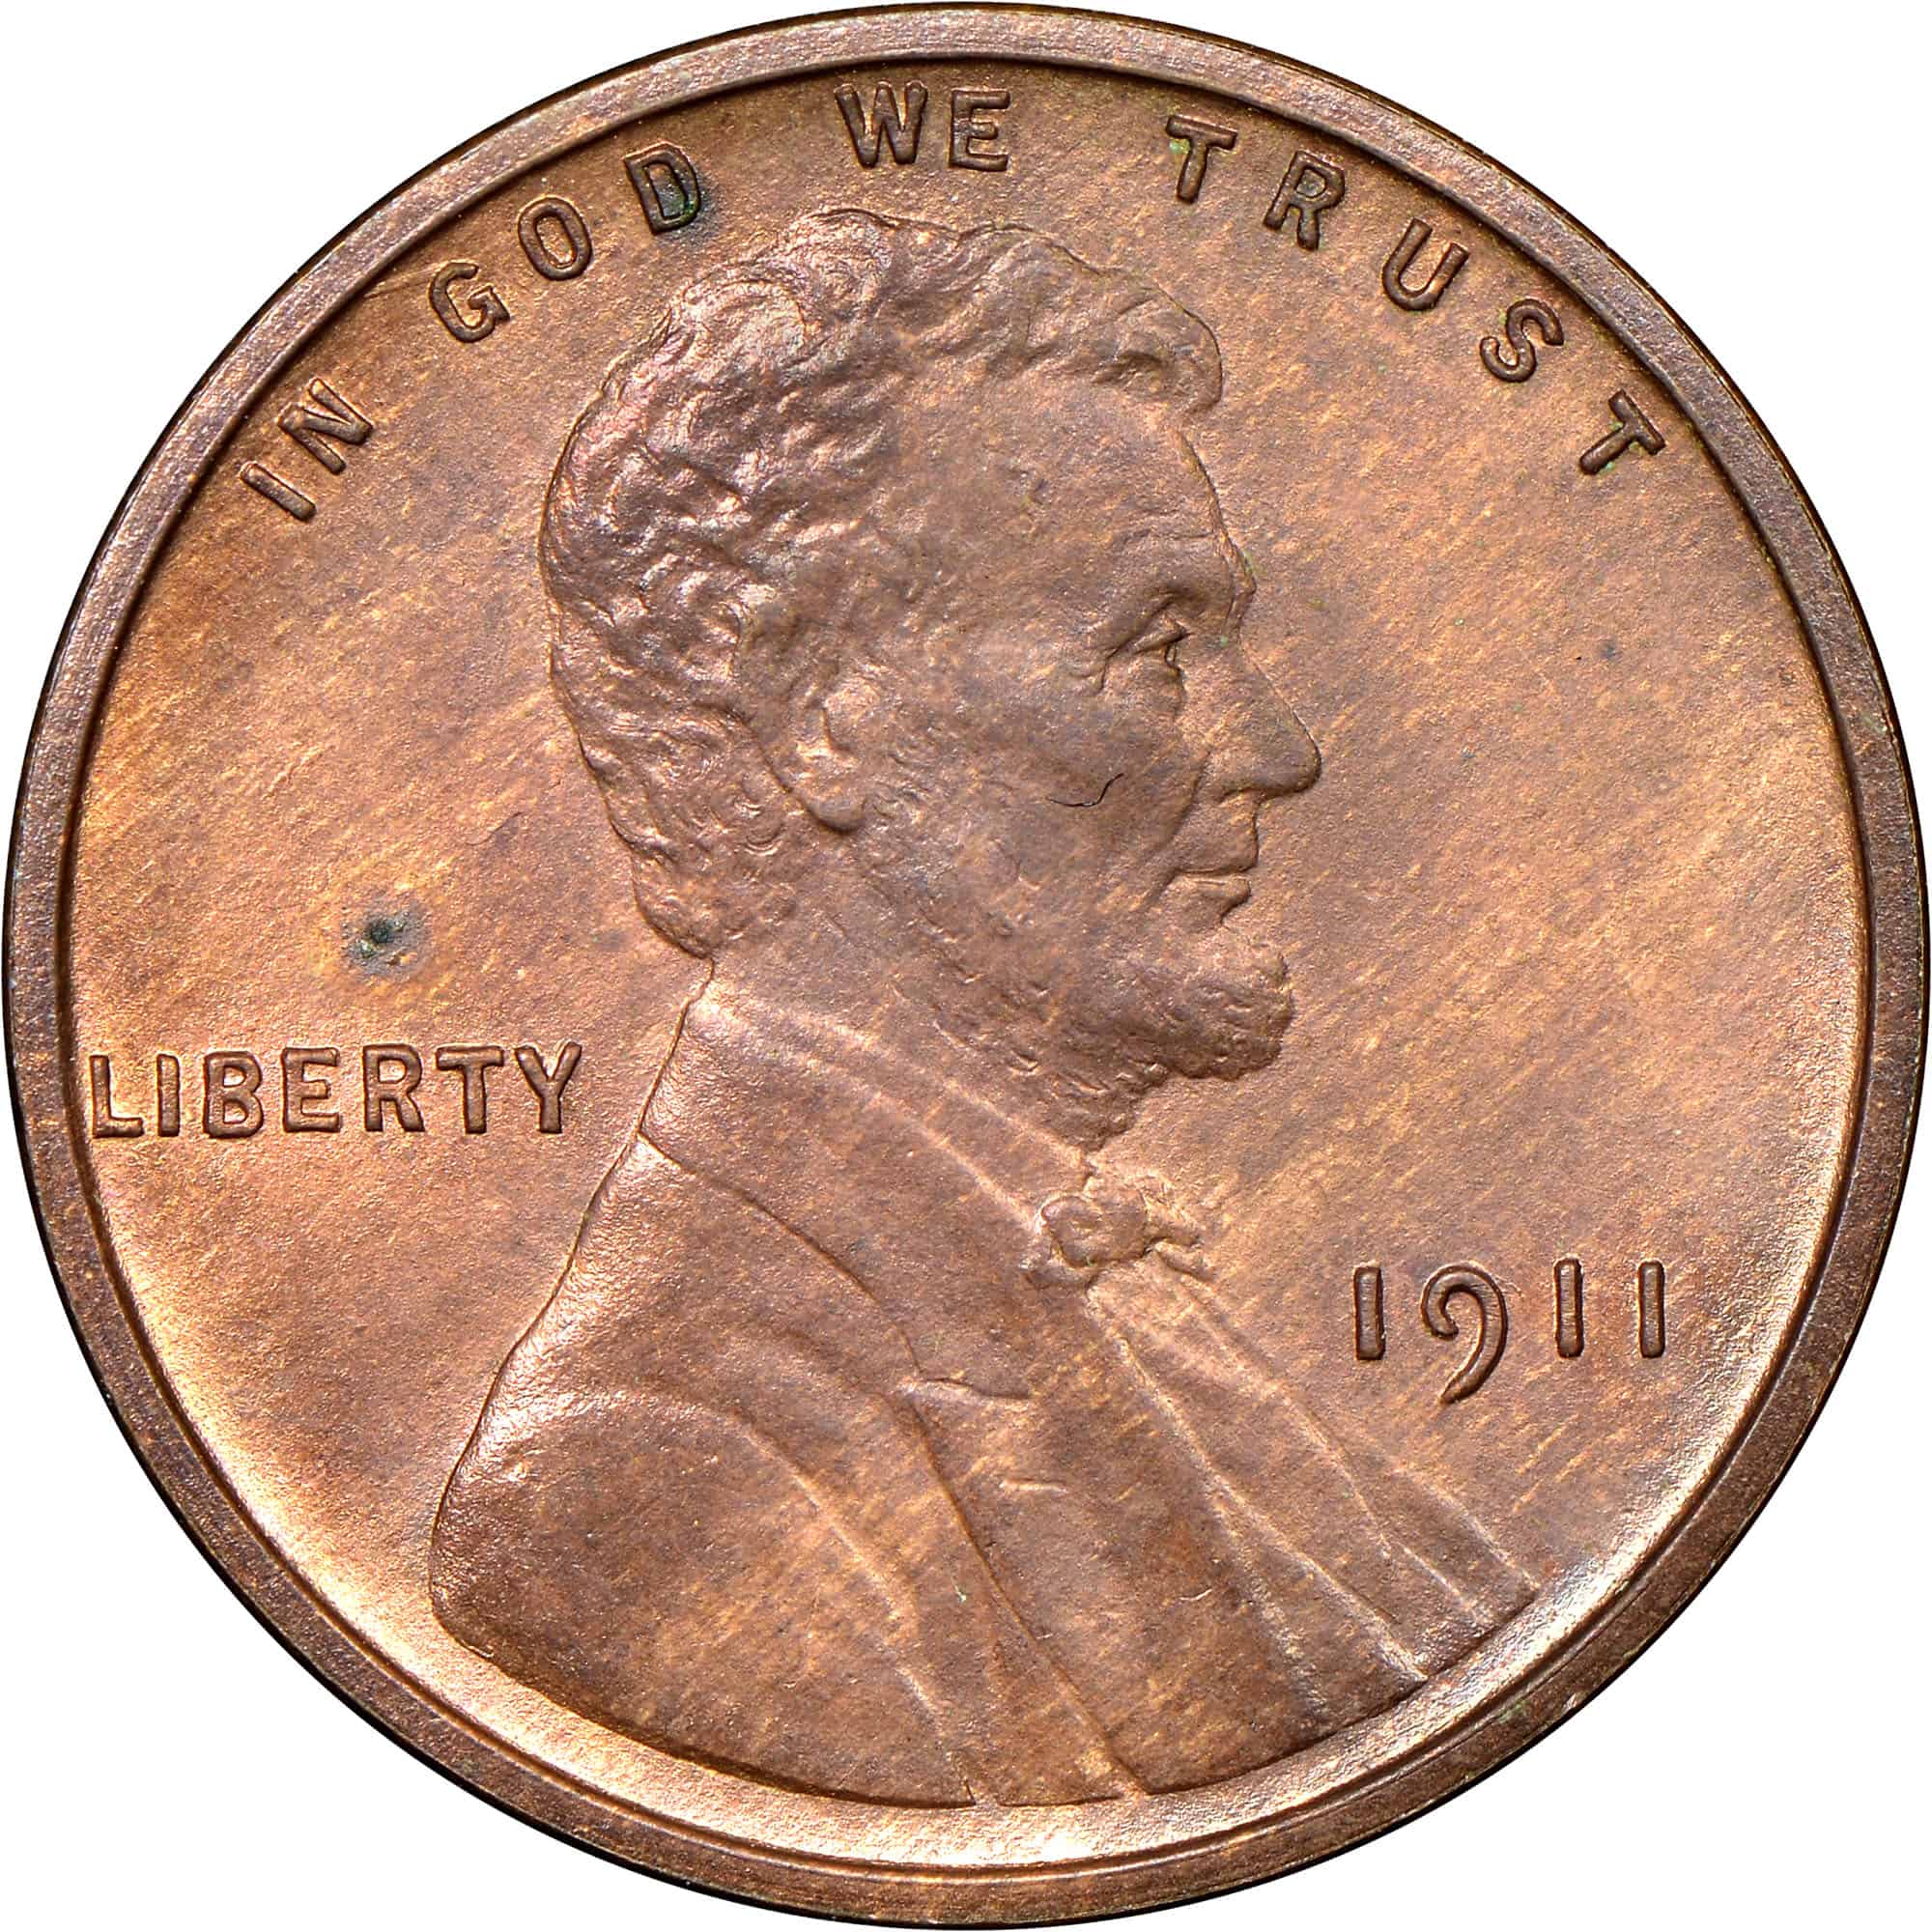 1911 Wheat Penny Obverse